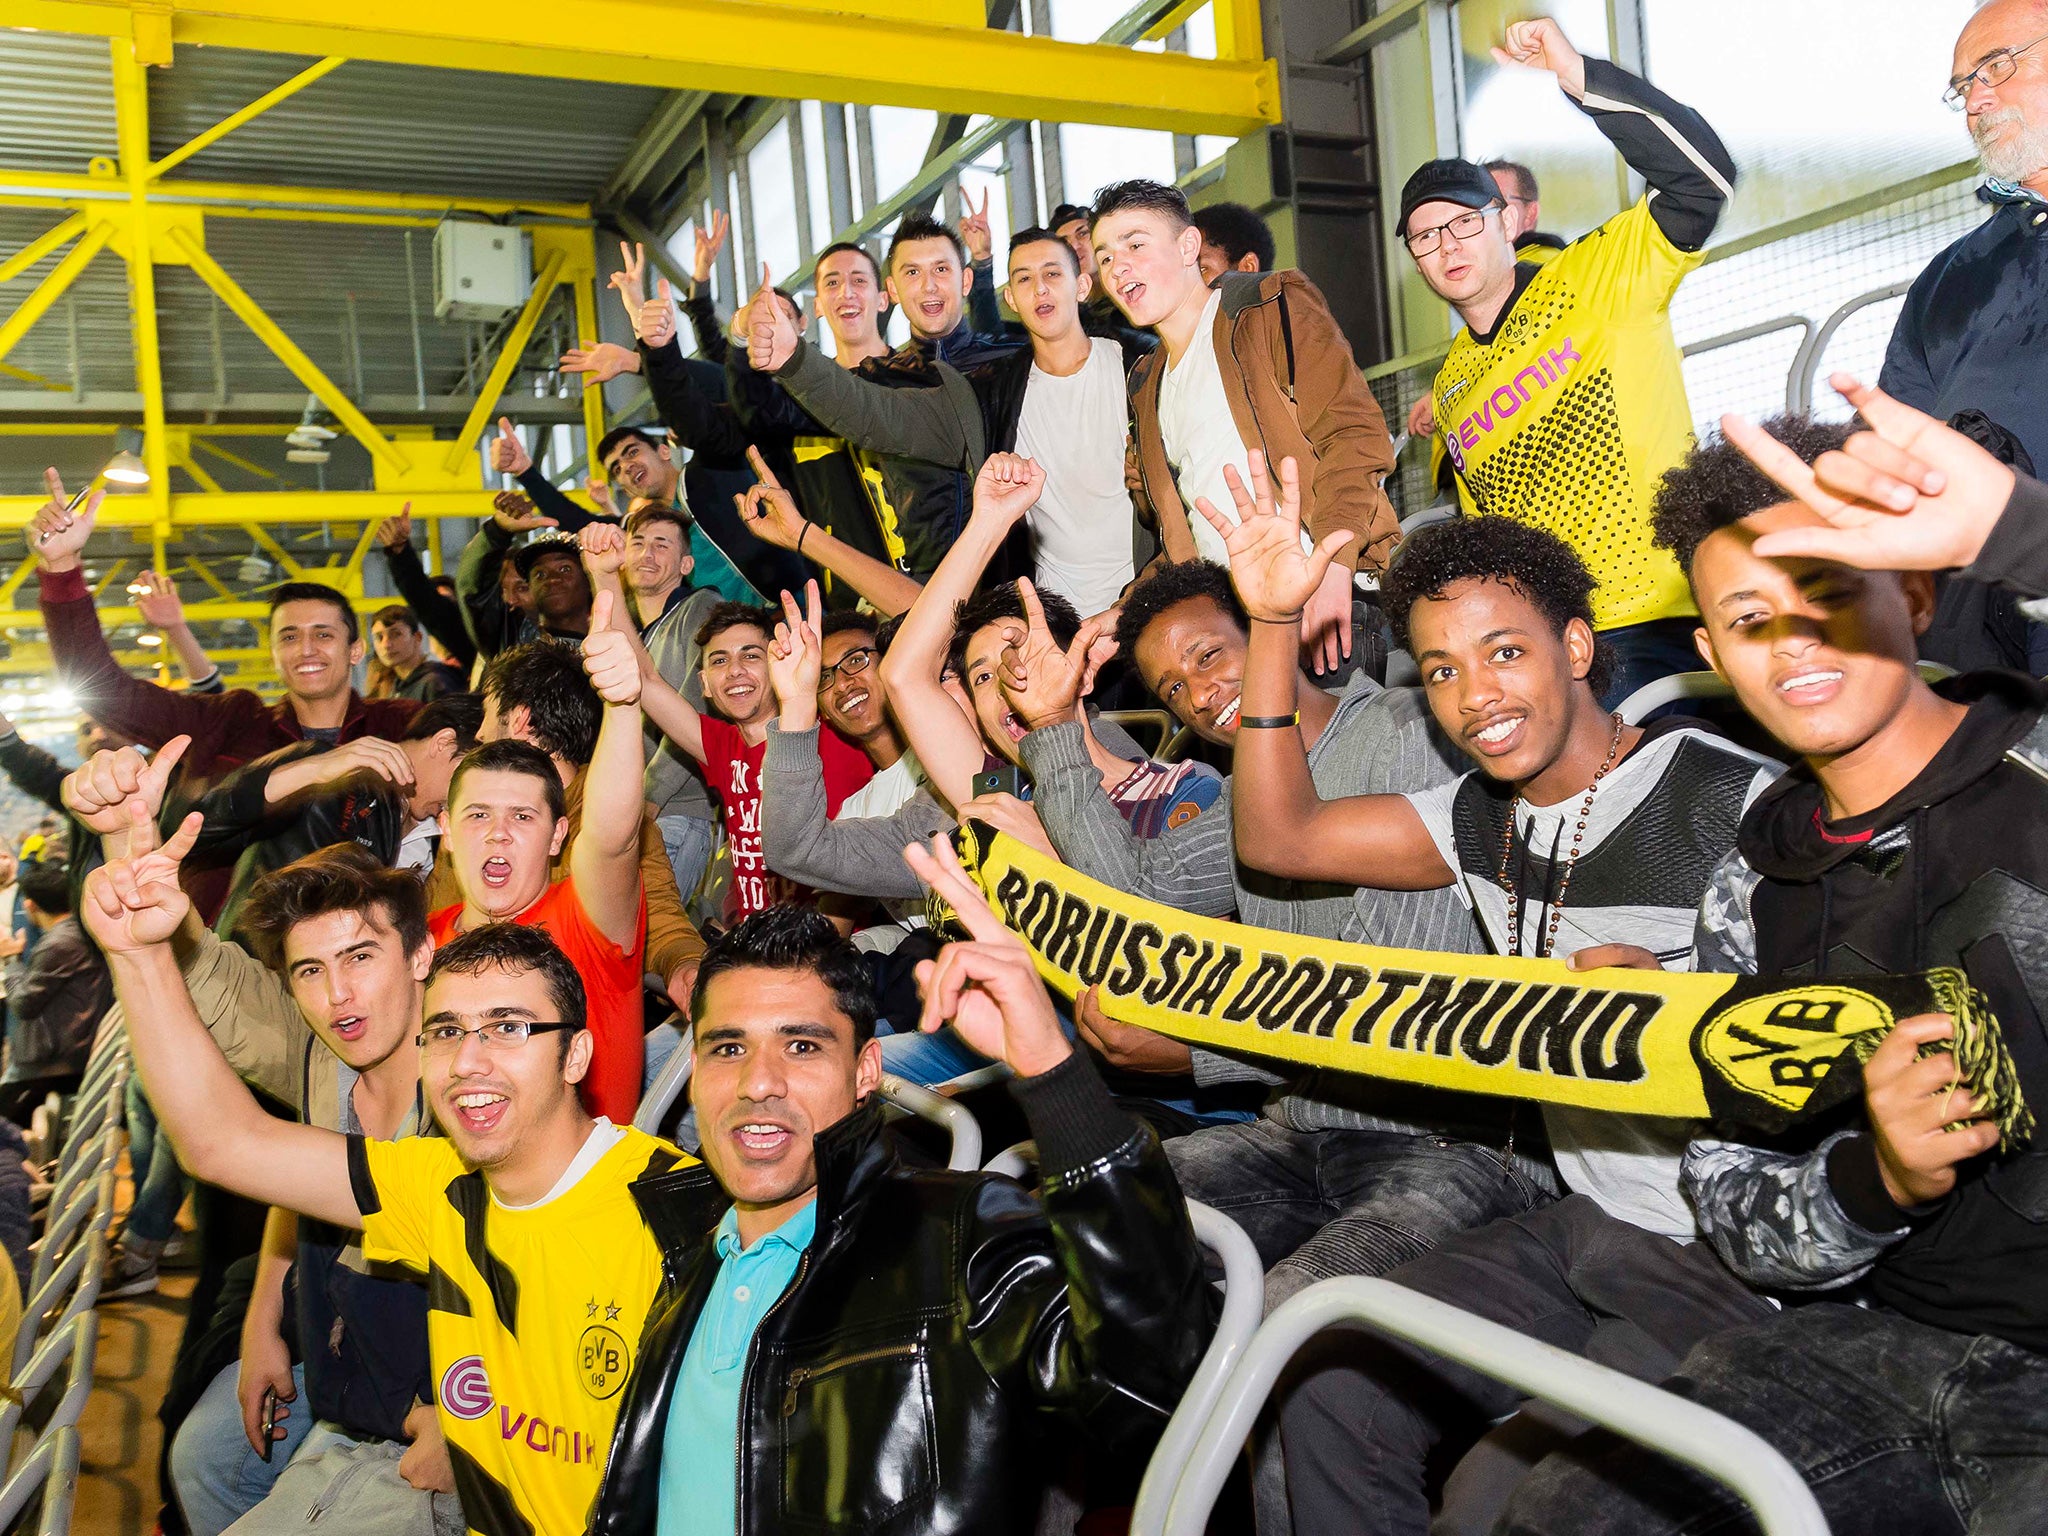 Hundreds of refugees were recently invited to a Borussia Dortmund match against Odds